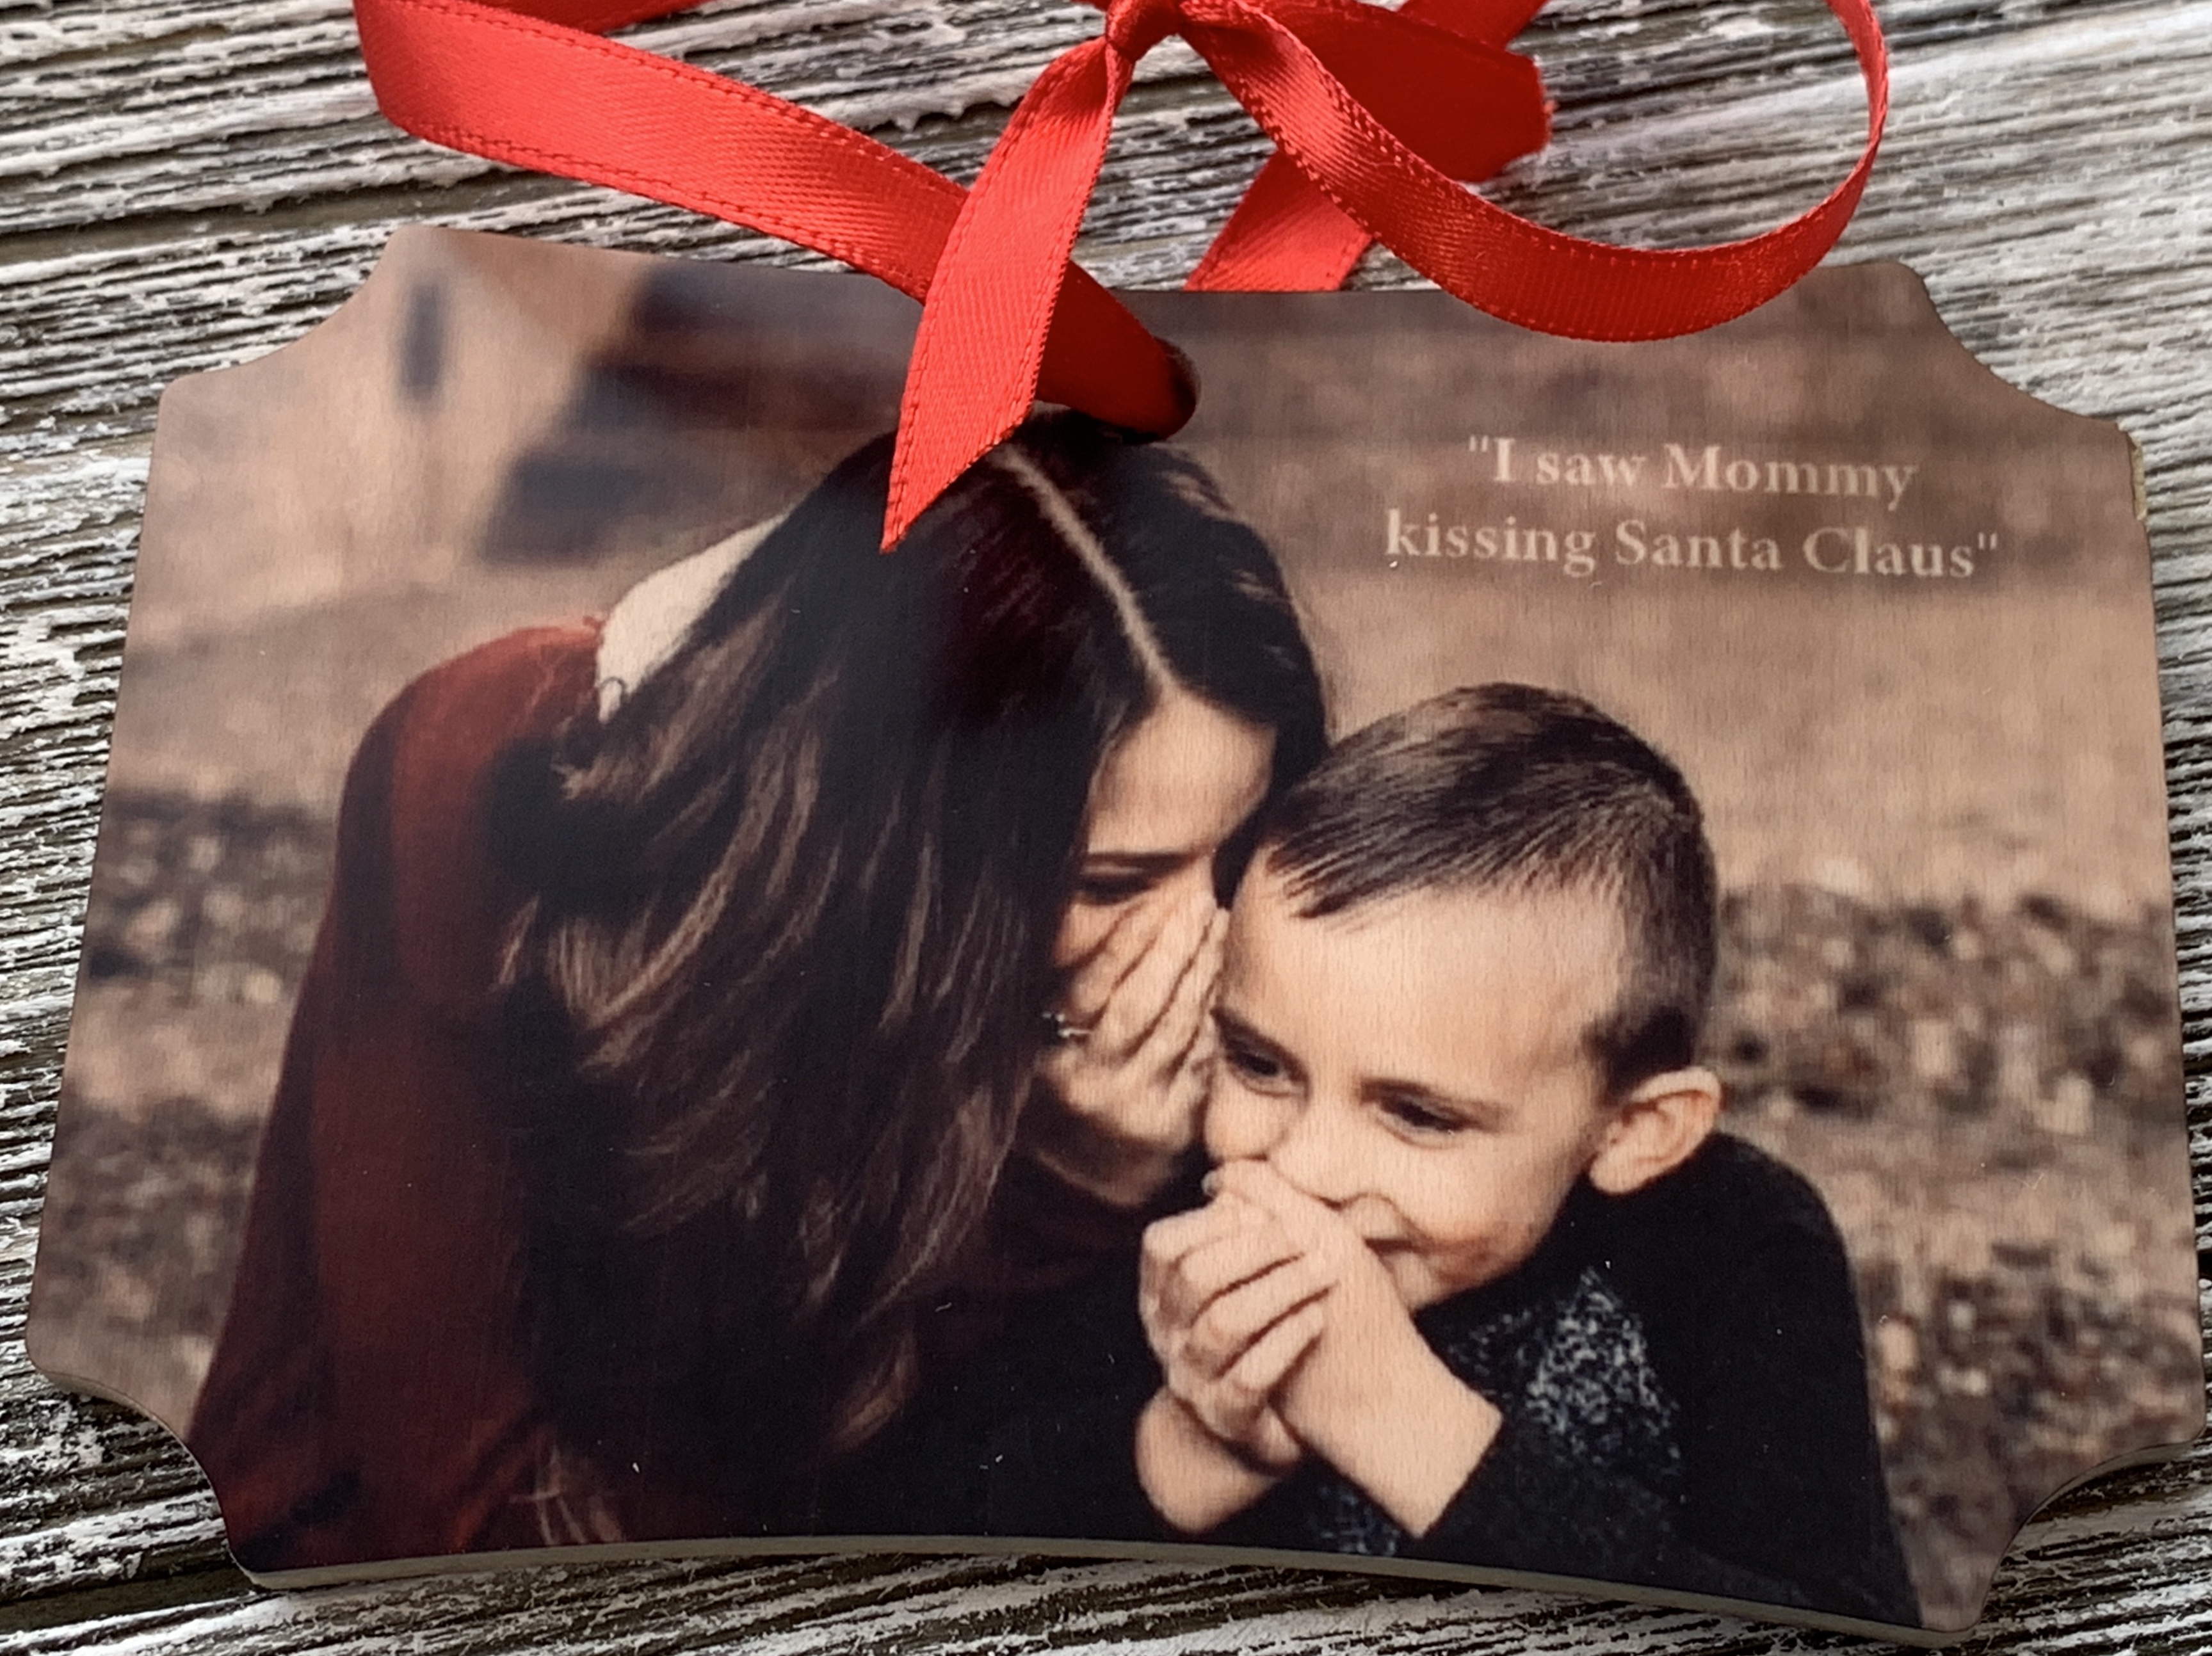 I saw Mommy kissing SANTA Claus made with sublimation printing